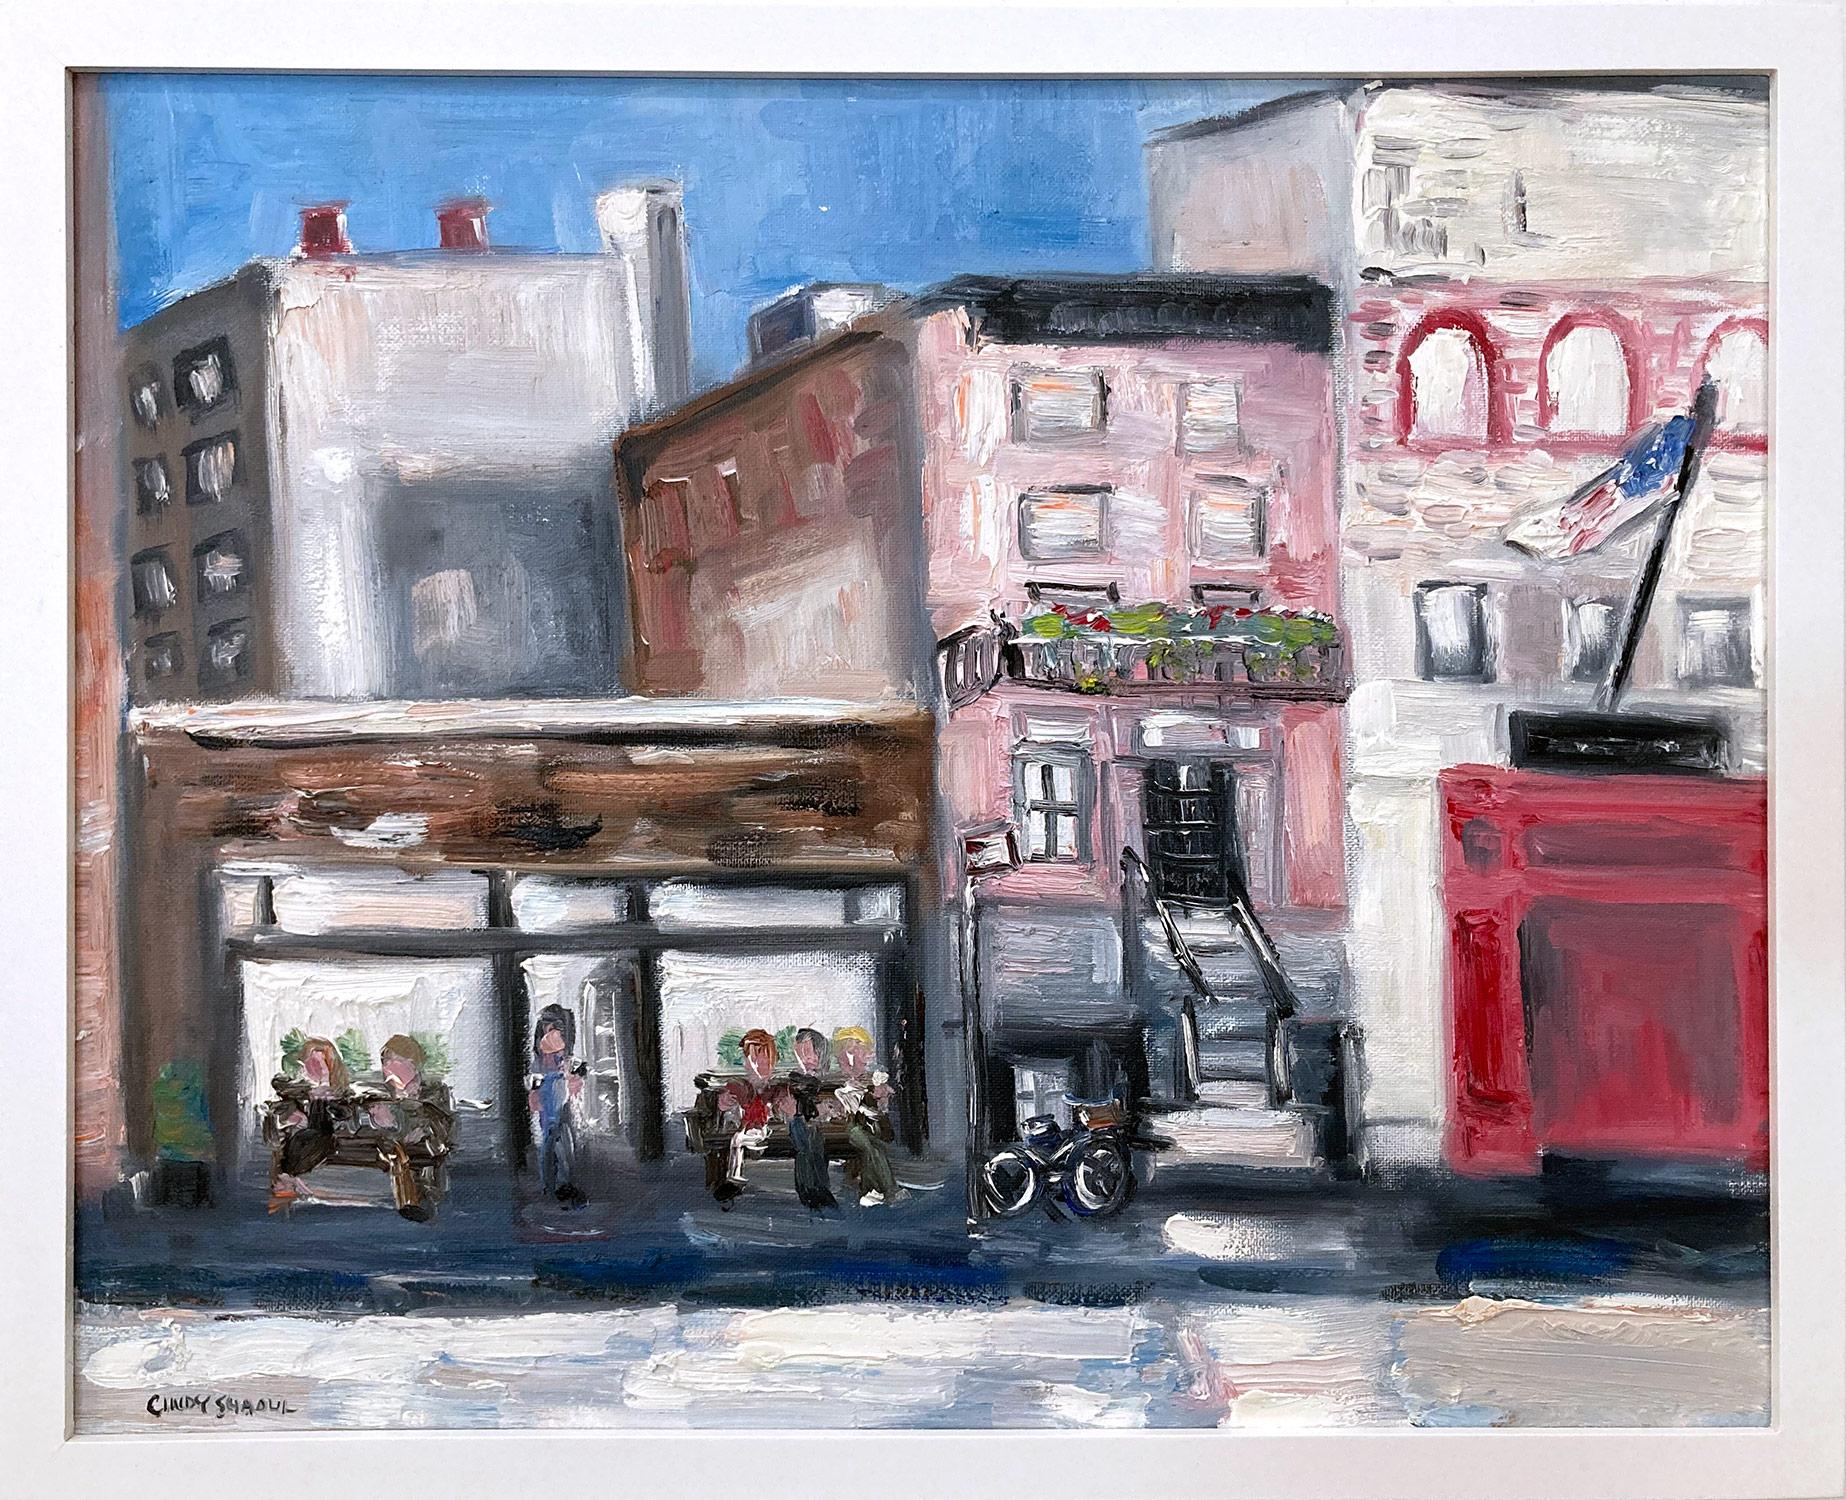 Cindy Shaoul Landscape Painting - "West Village Coffee Stop" Oil Painting of a Plein Air Street NYC with Figures